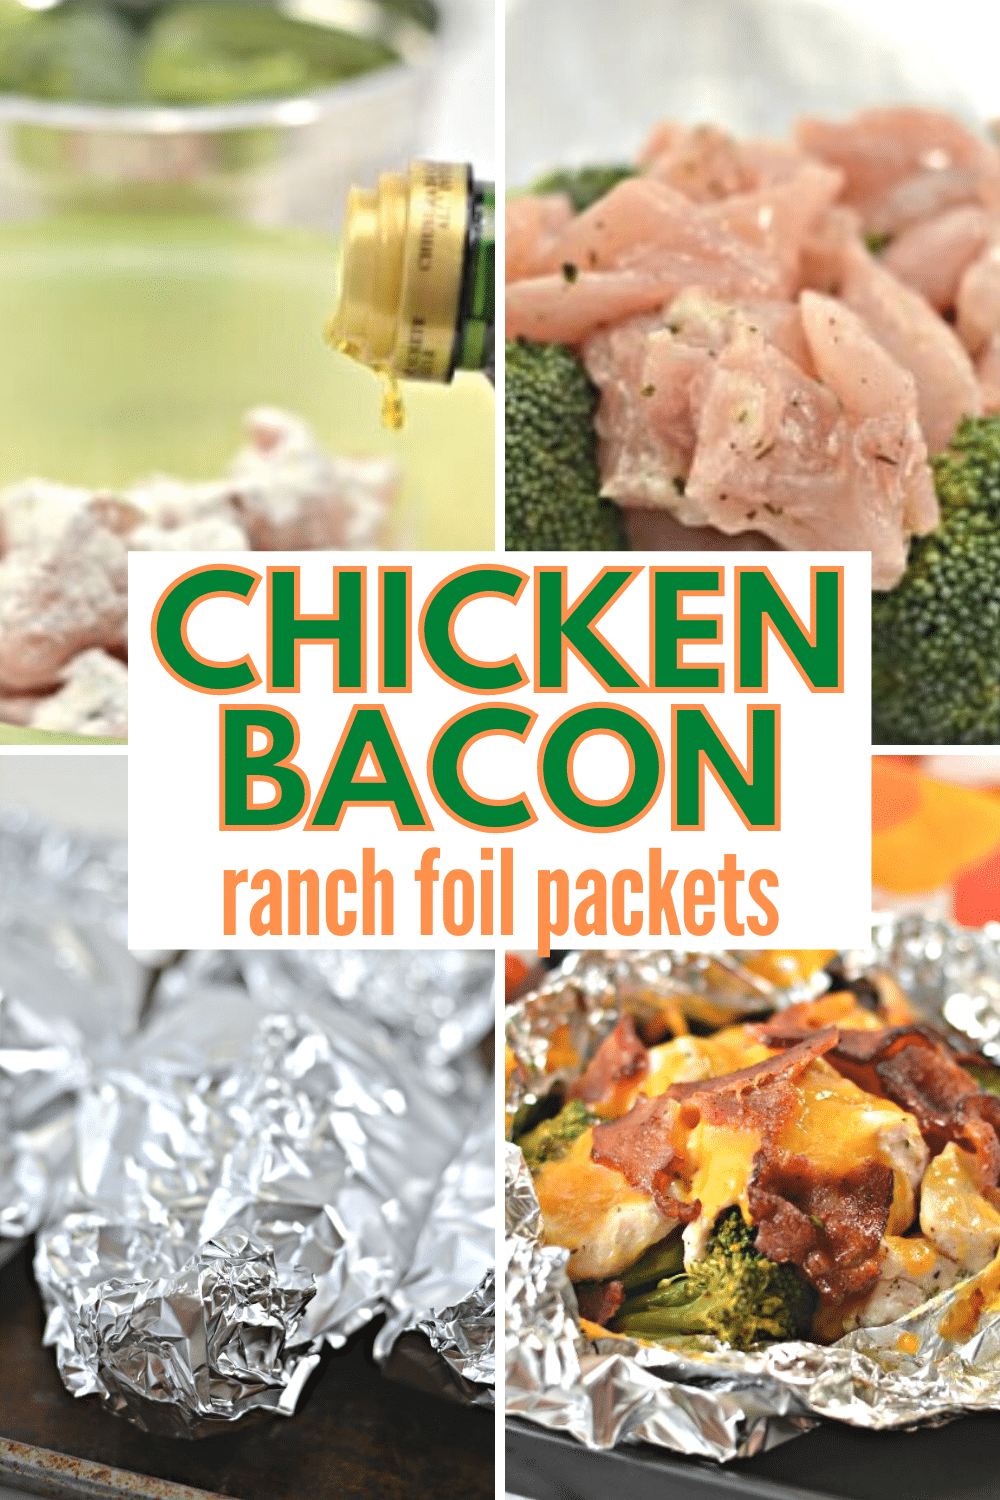 Chicken Bacon Ranch Foil Packets are a quick and easy meal with practically no clean up required. It's a great meal for camping trips. #foilpackets #chicken #campingmeal #chickenbaconranchfoilpackets #chickenbaconranch via @wondermomwannab